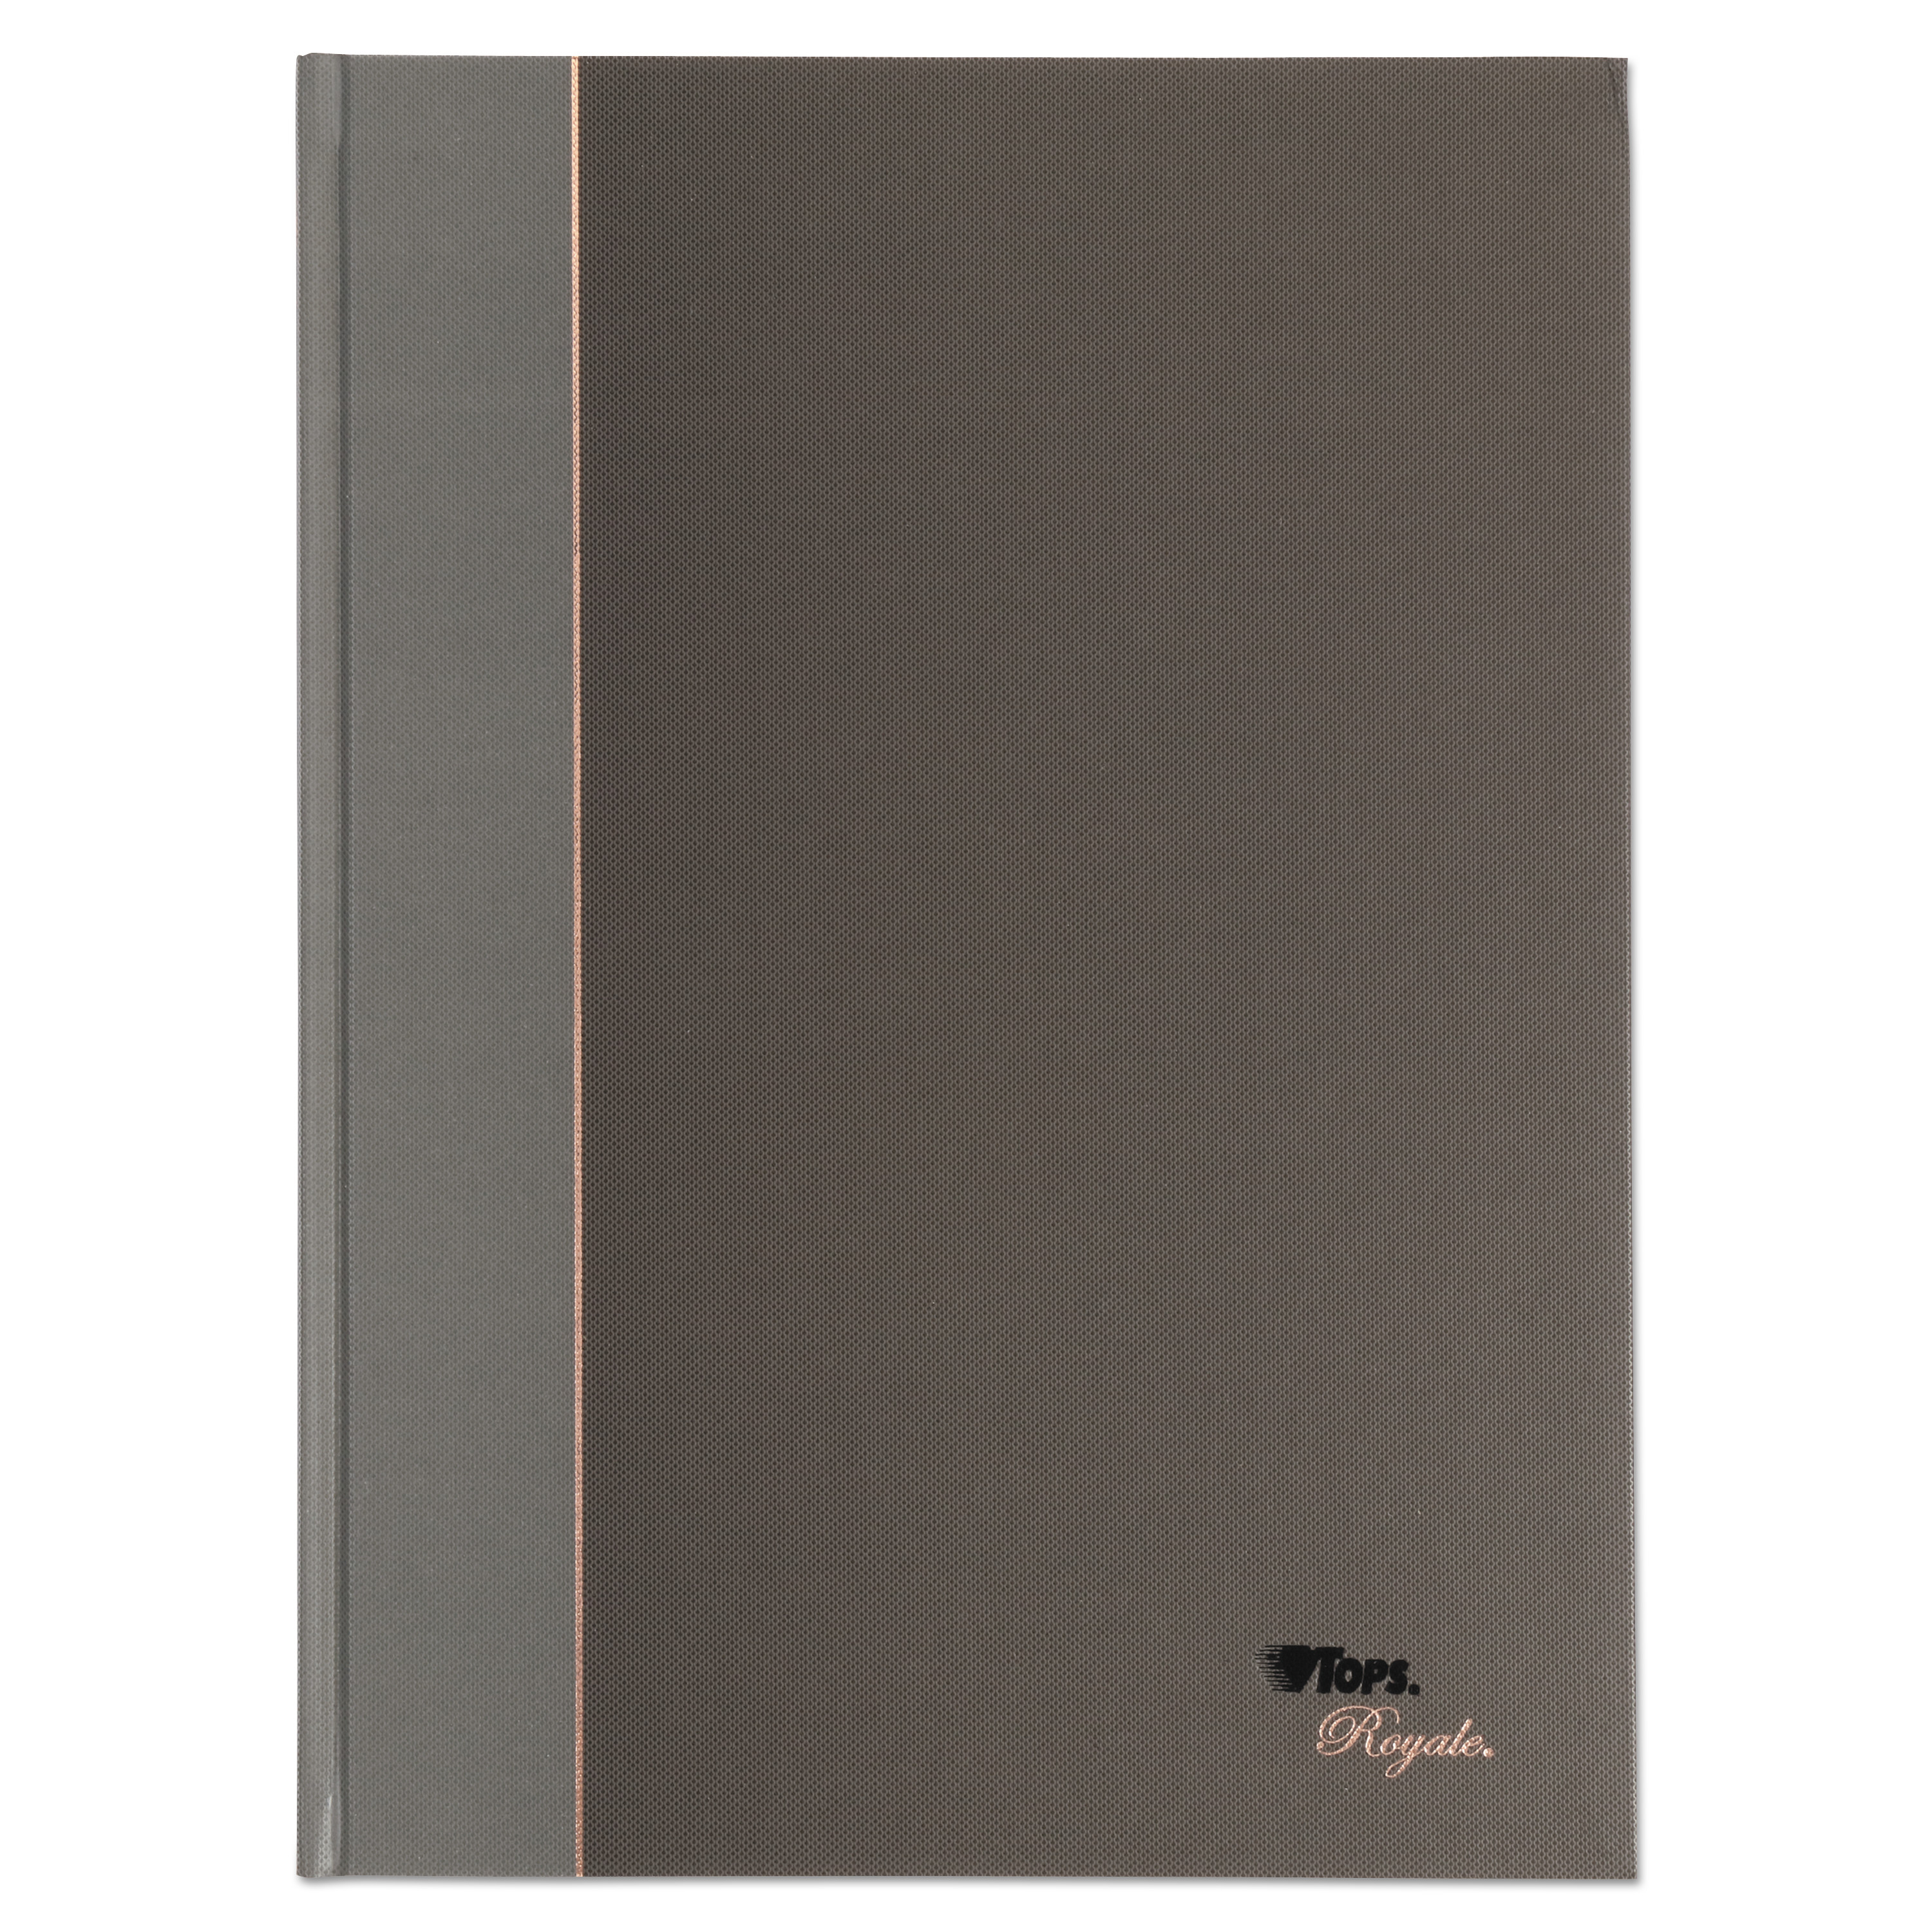  TOPS 25232 Royale Casebound Business Notebook, College, Black/Gray, 11.75 x 8.25, 96 Sheets (TOP25232) 